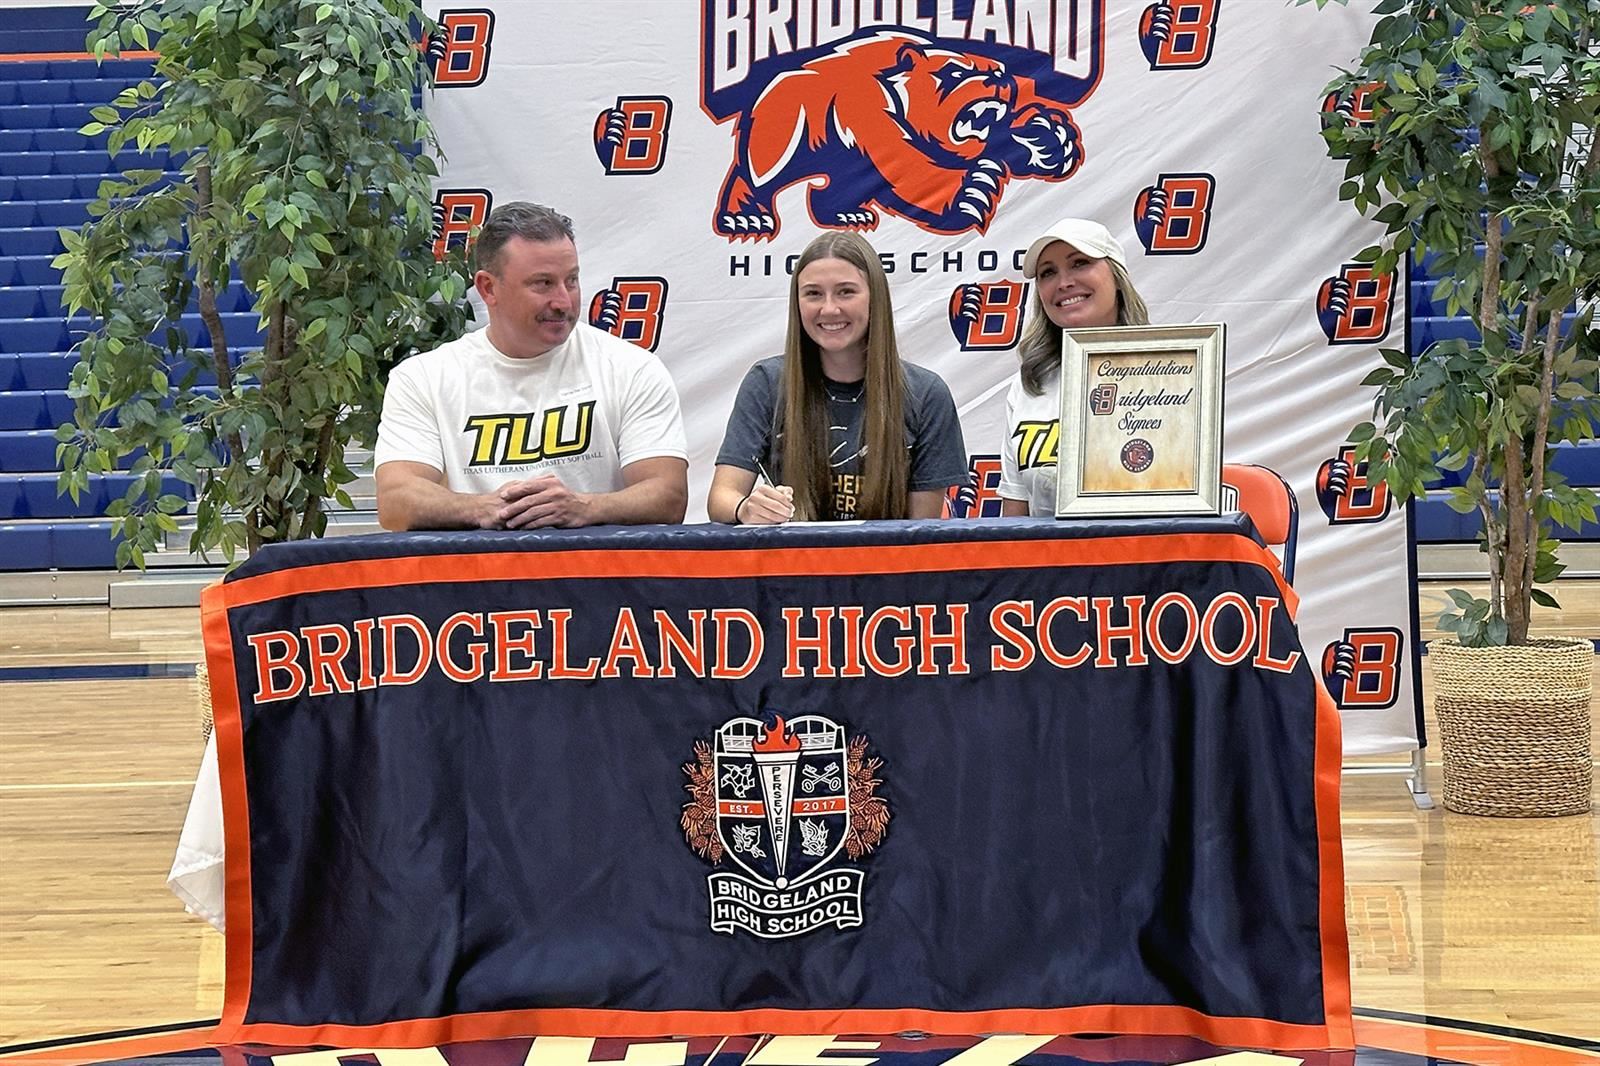 Bridgeland High School senior Chesley Swisher, center, signed her letter of intent to play softball at Texas Lutheran.